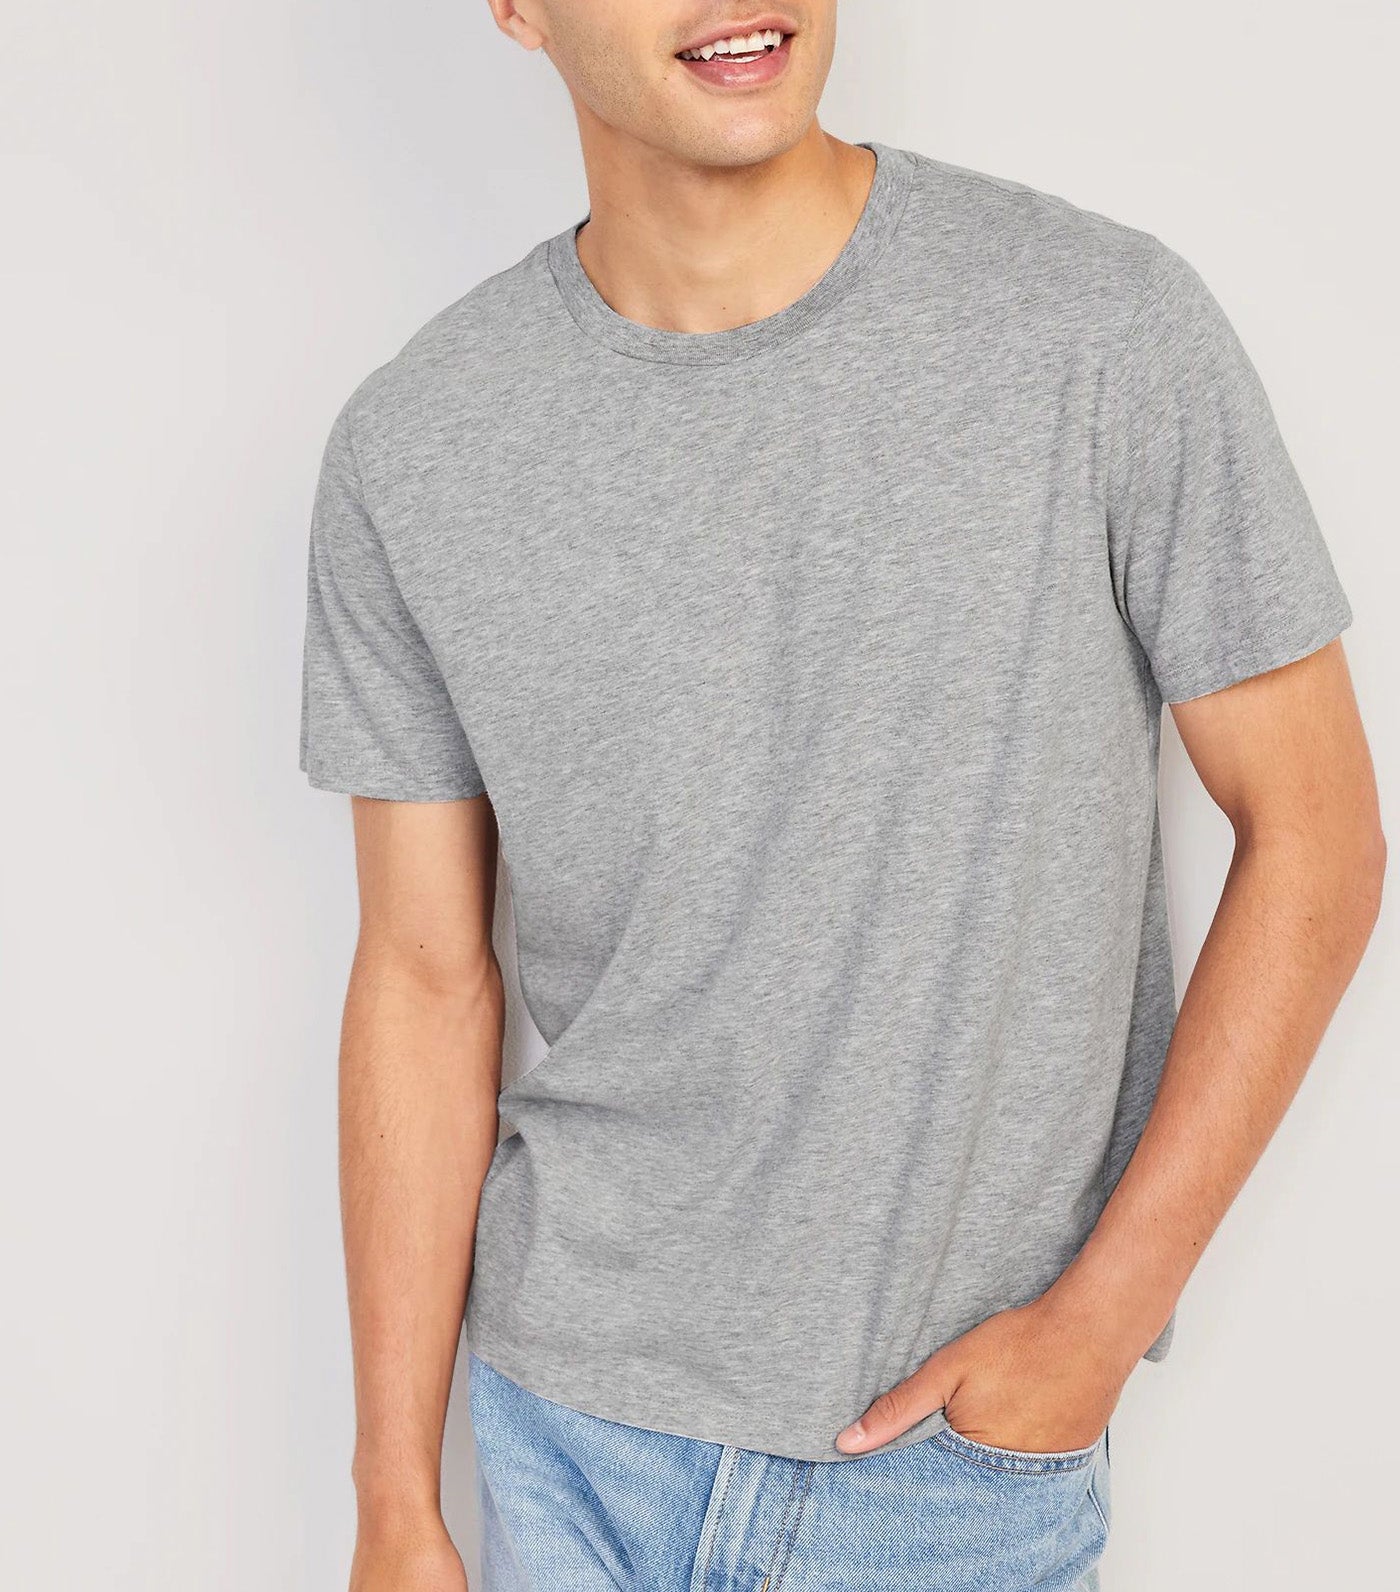 Soft-Washed Crew-Neck T-Shirt for Men Light Gray